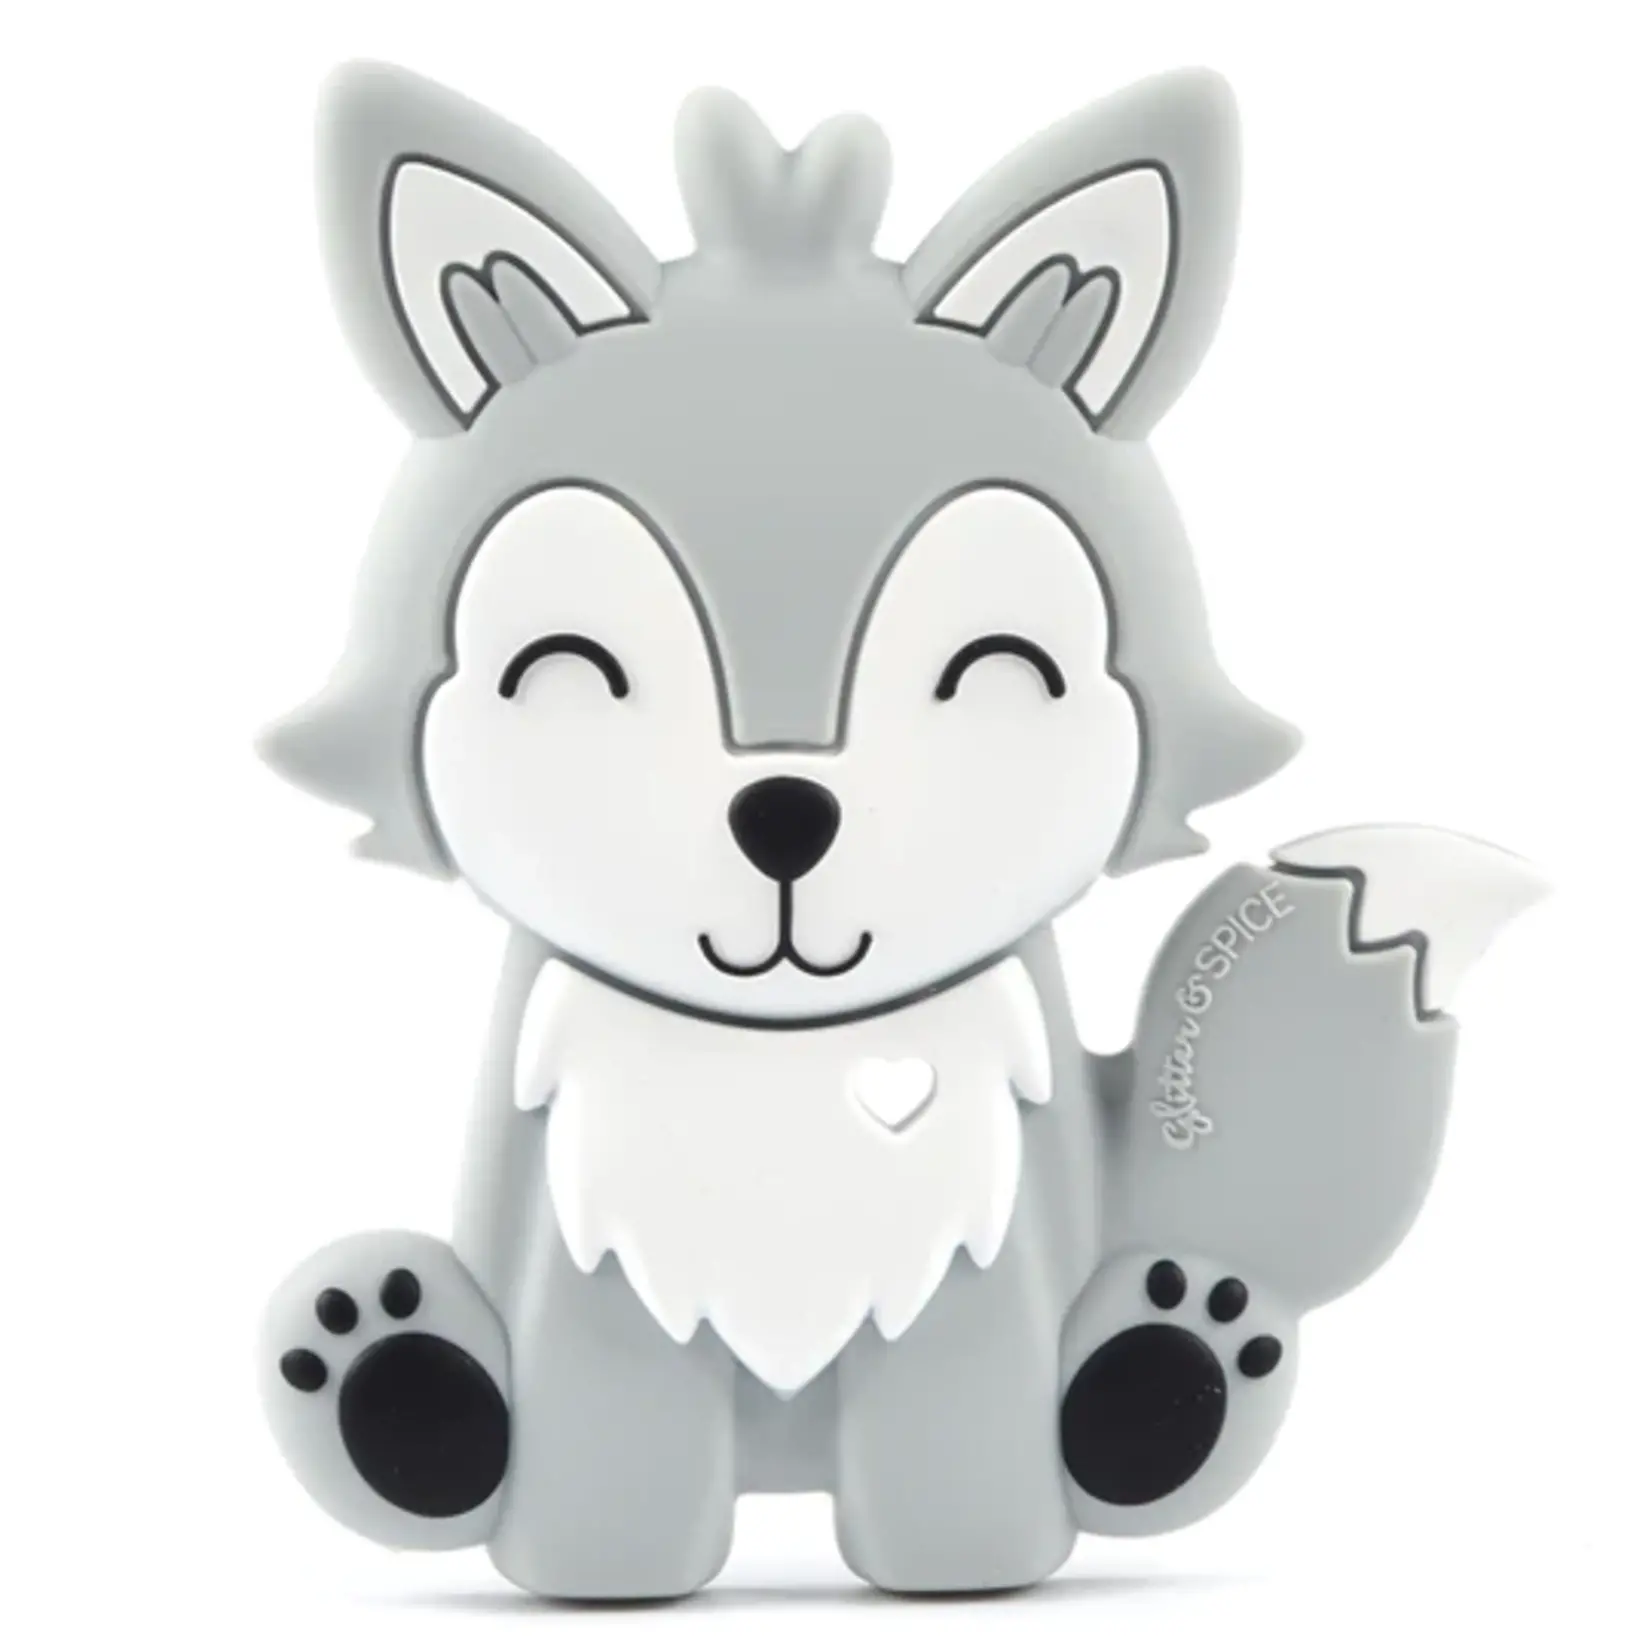 Glitter & Spice Glitter & Spice Teether Wolf Pup